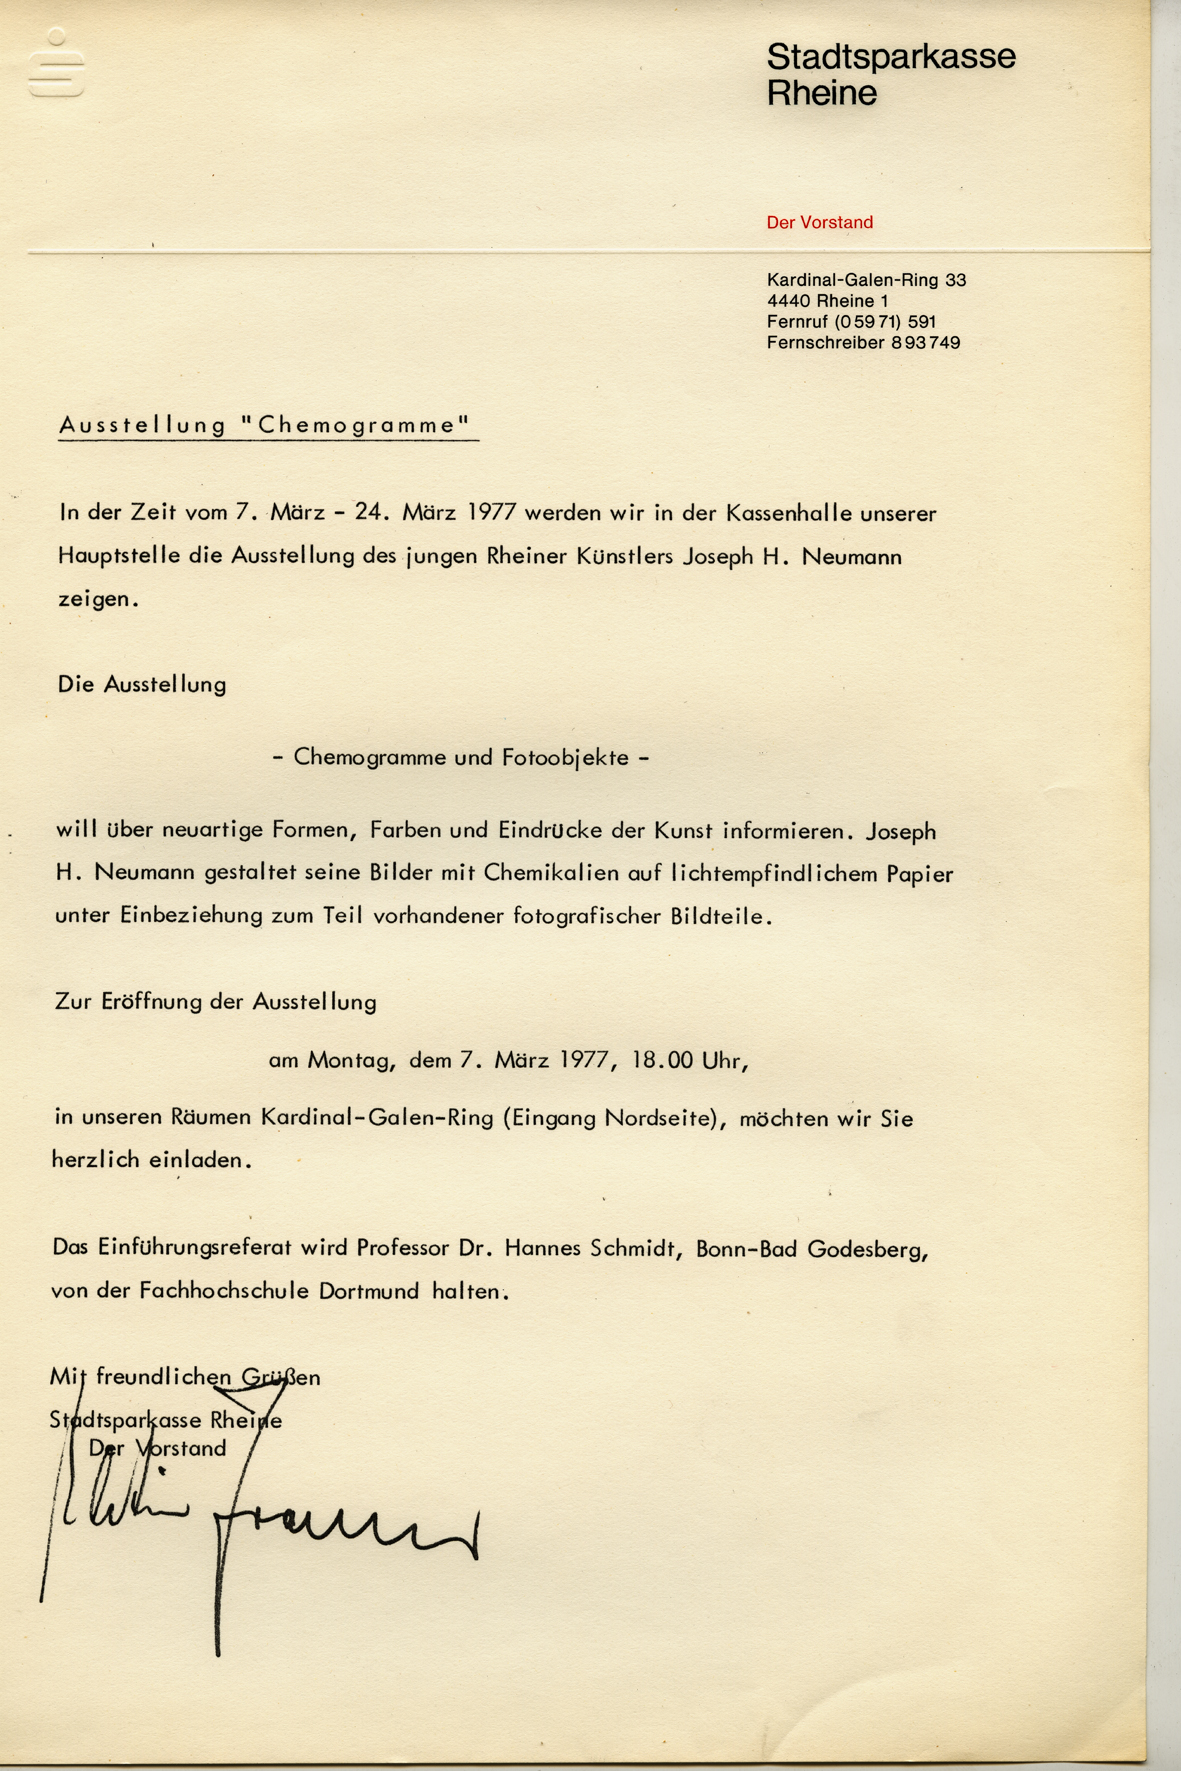 Invitation of the Management of the Sparkasse Rheine 1976 on the occasion of the Exhibition CHEMOGRAMME u. FOTO OBJEKTE v. Josef H. Neumann